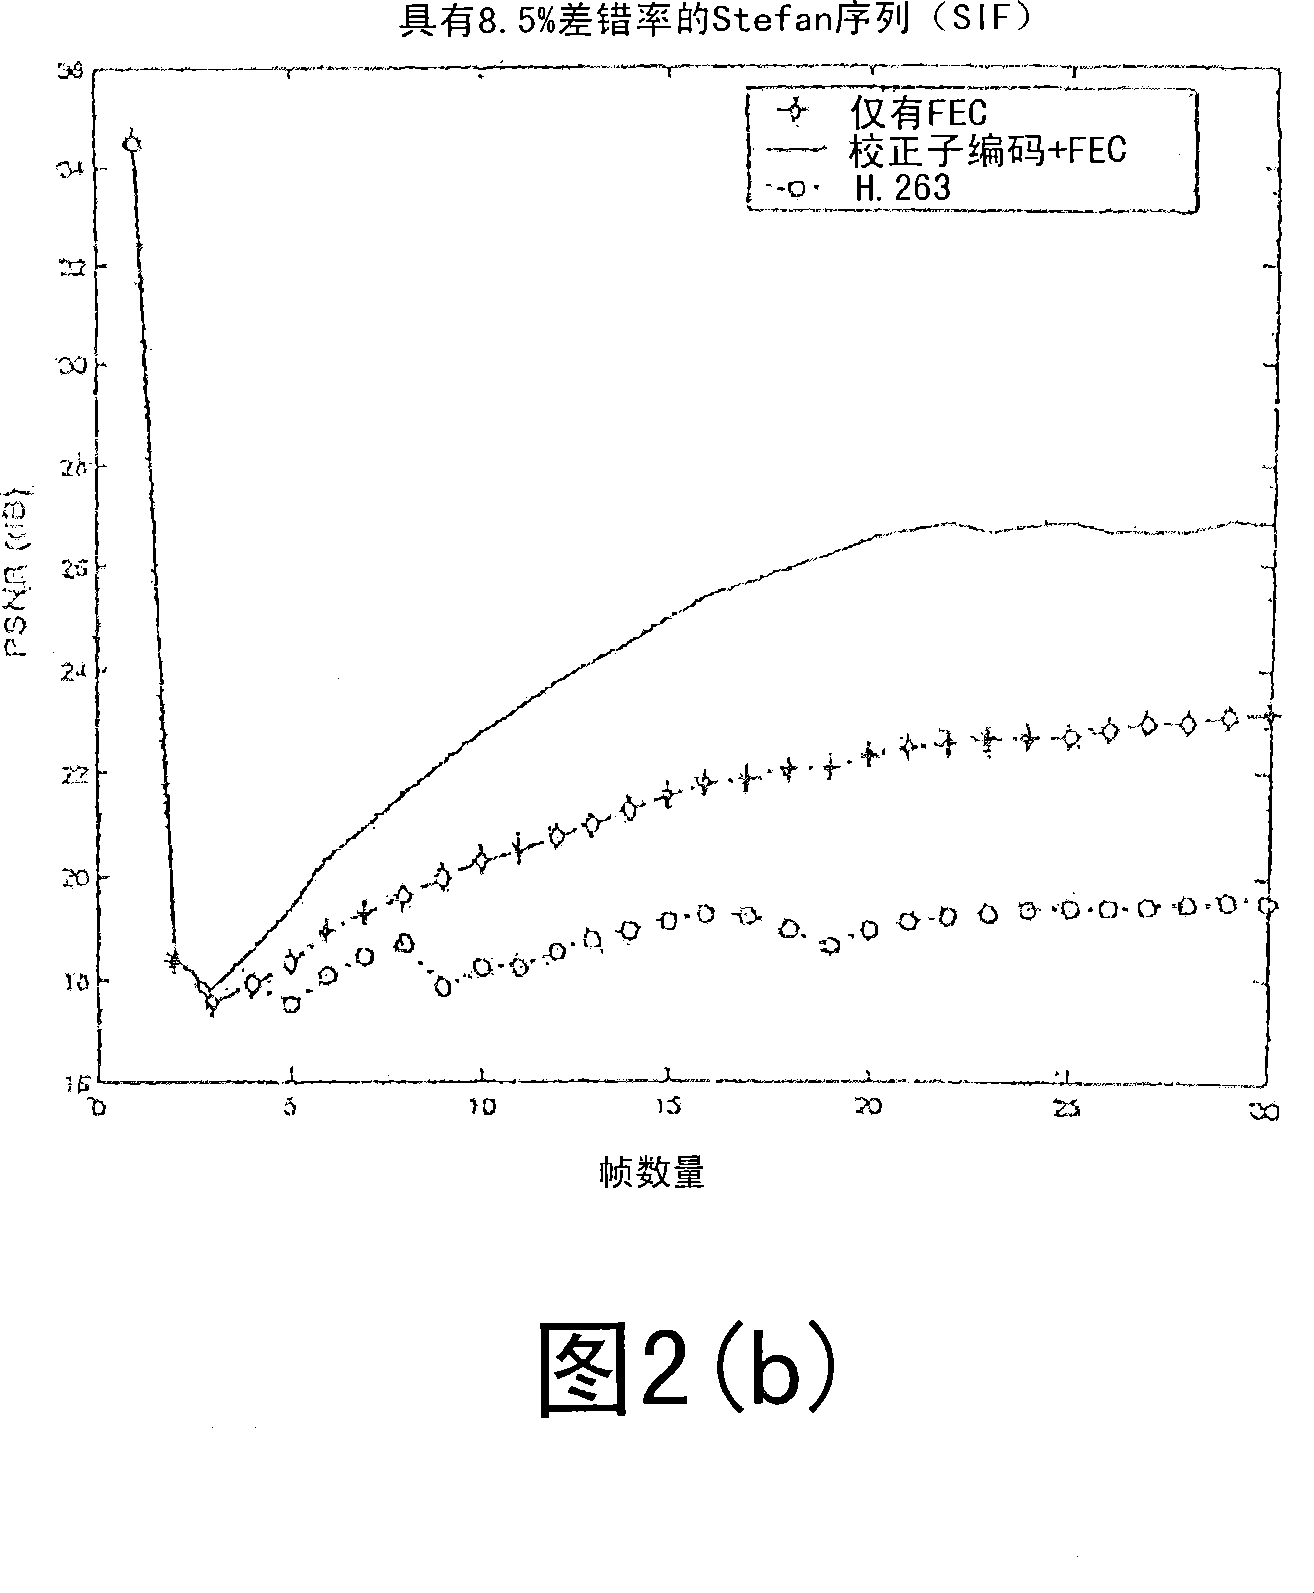 Method, apparatus, and system for enhancing robustness of predictive video codecs using a side-channel based on distributed source coding techniques